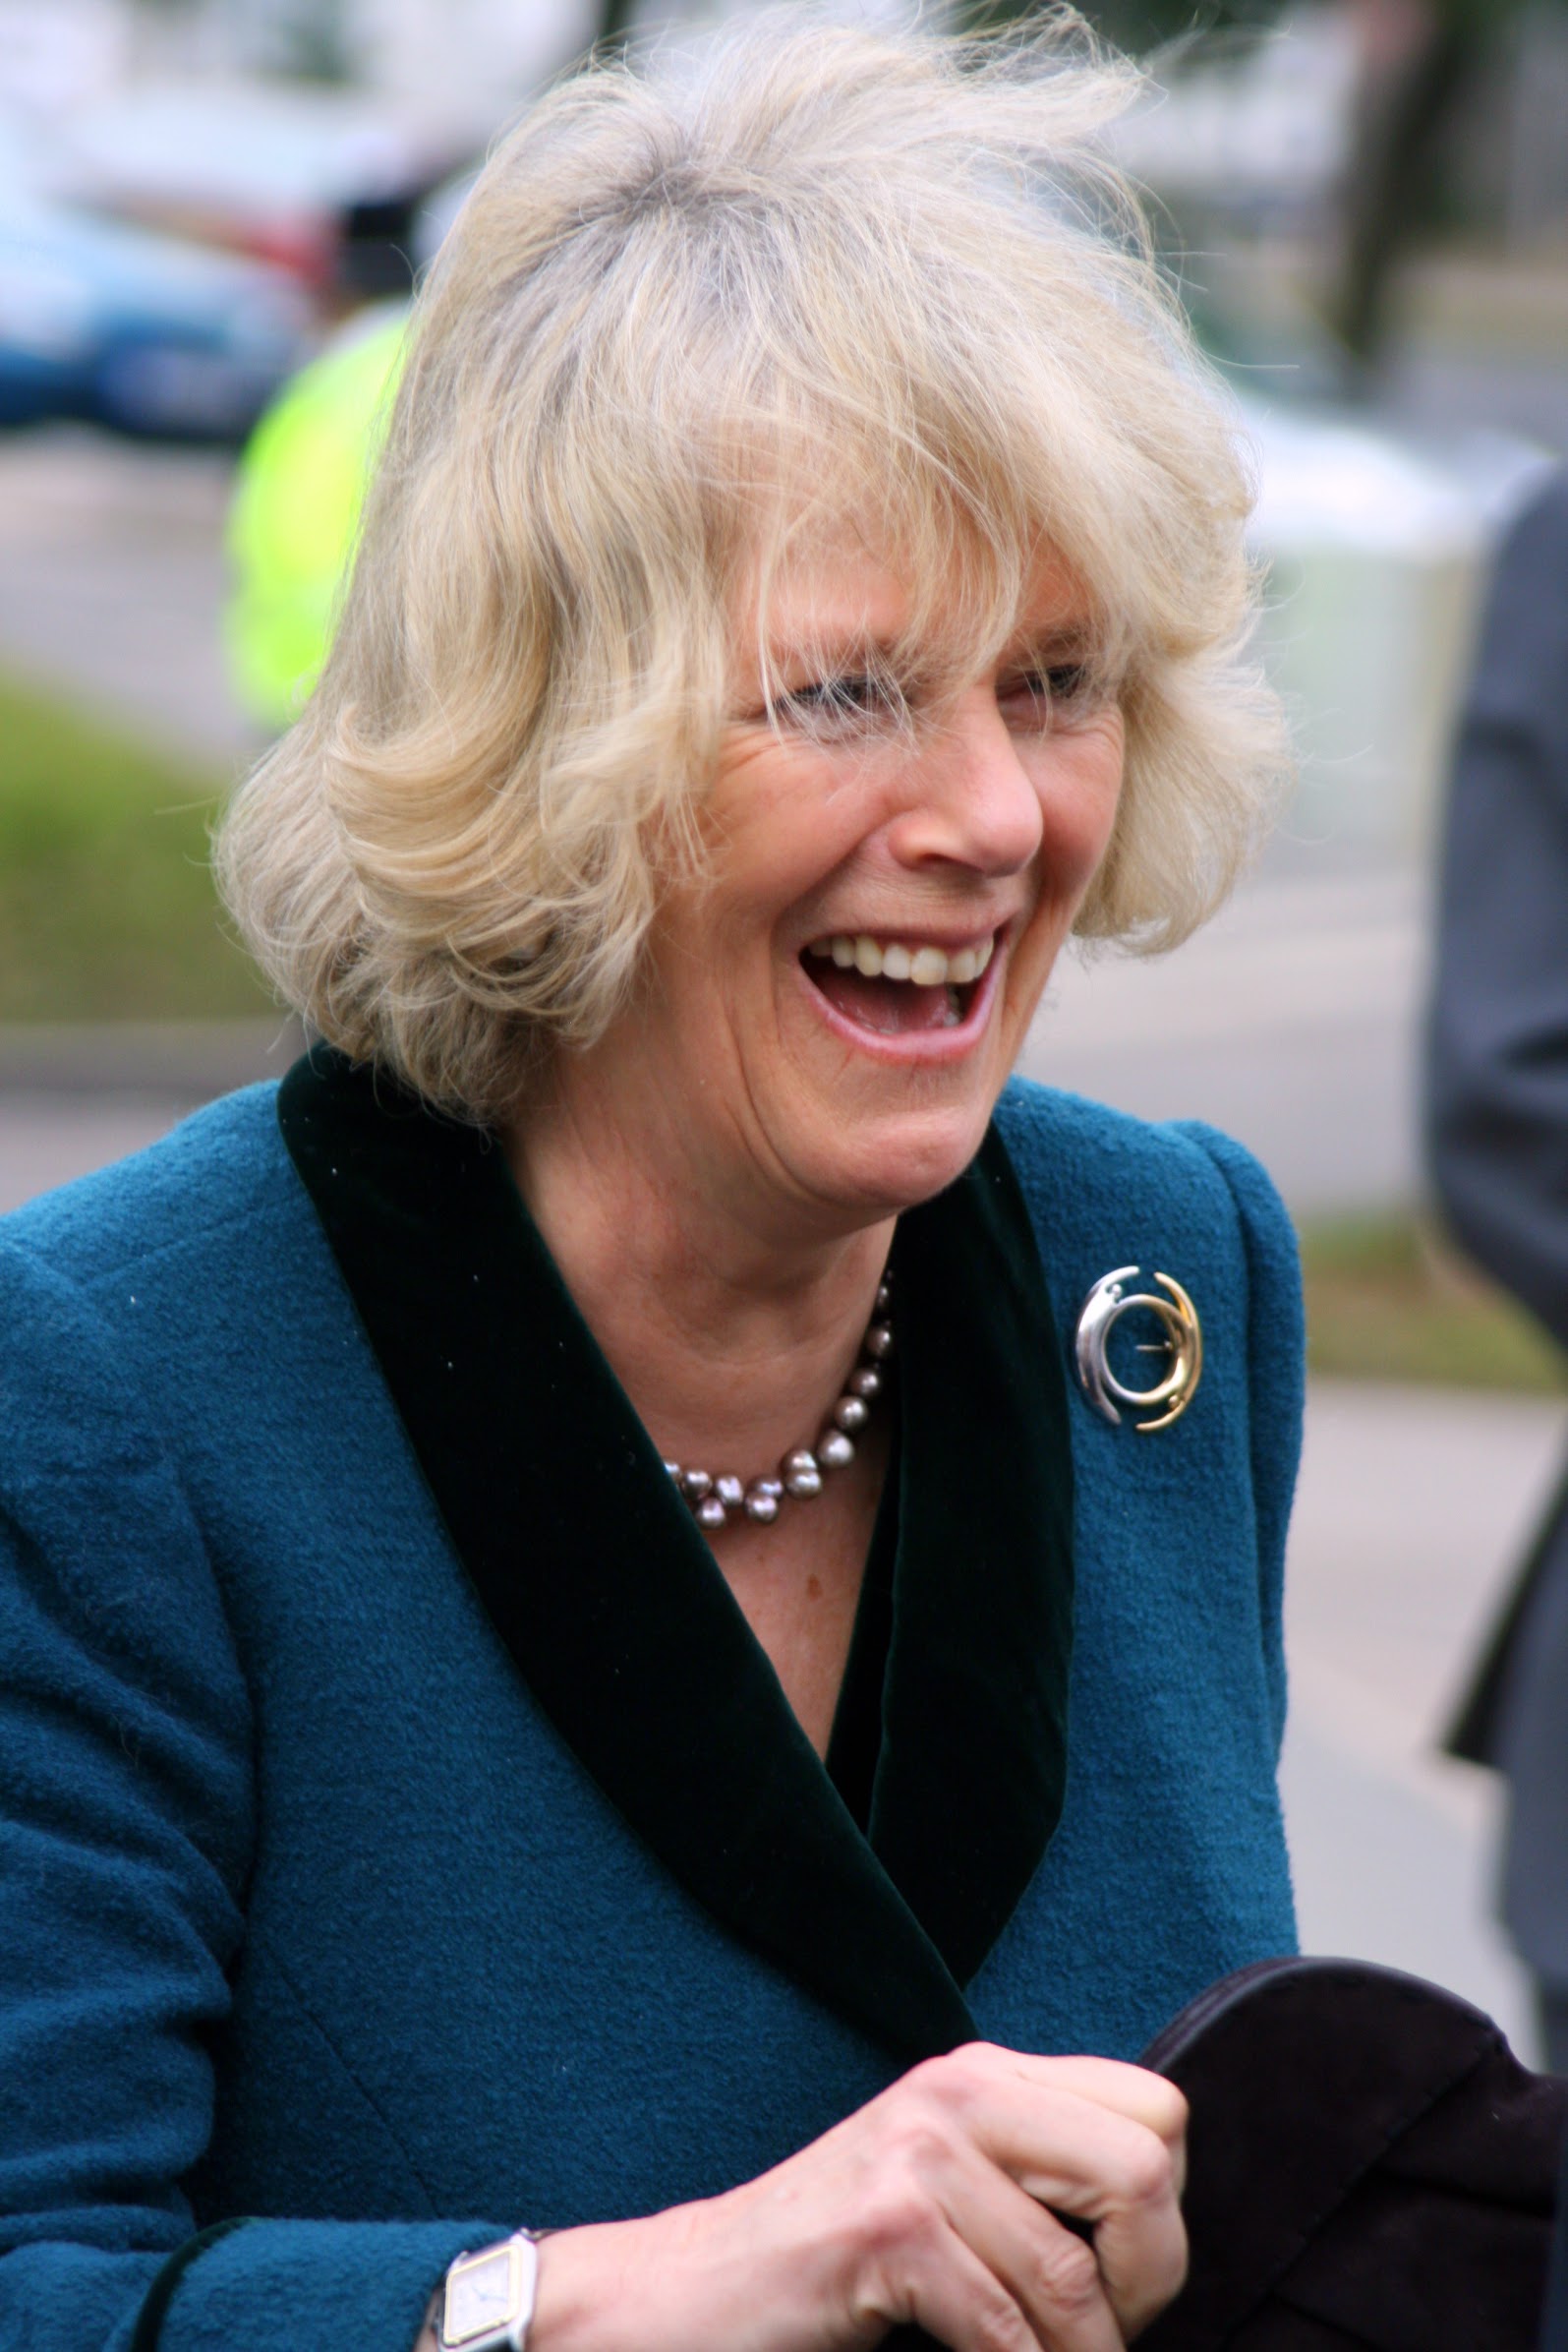  HRH The Duchess of Cornwall visits Rotherham General Hospital. The Duchess had entrusted an Aide with her handbag, was getting in her car and remembered she had forgot it, and burst out laughing when the Lord Lieutenant joked there'd been a theft! -